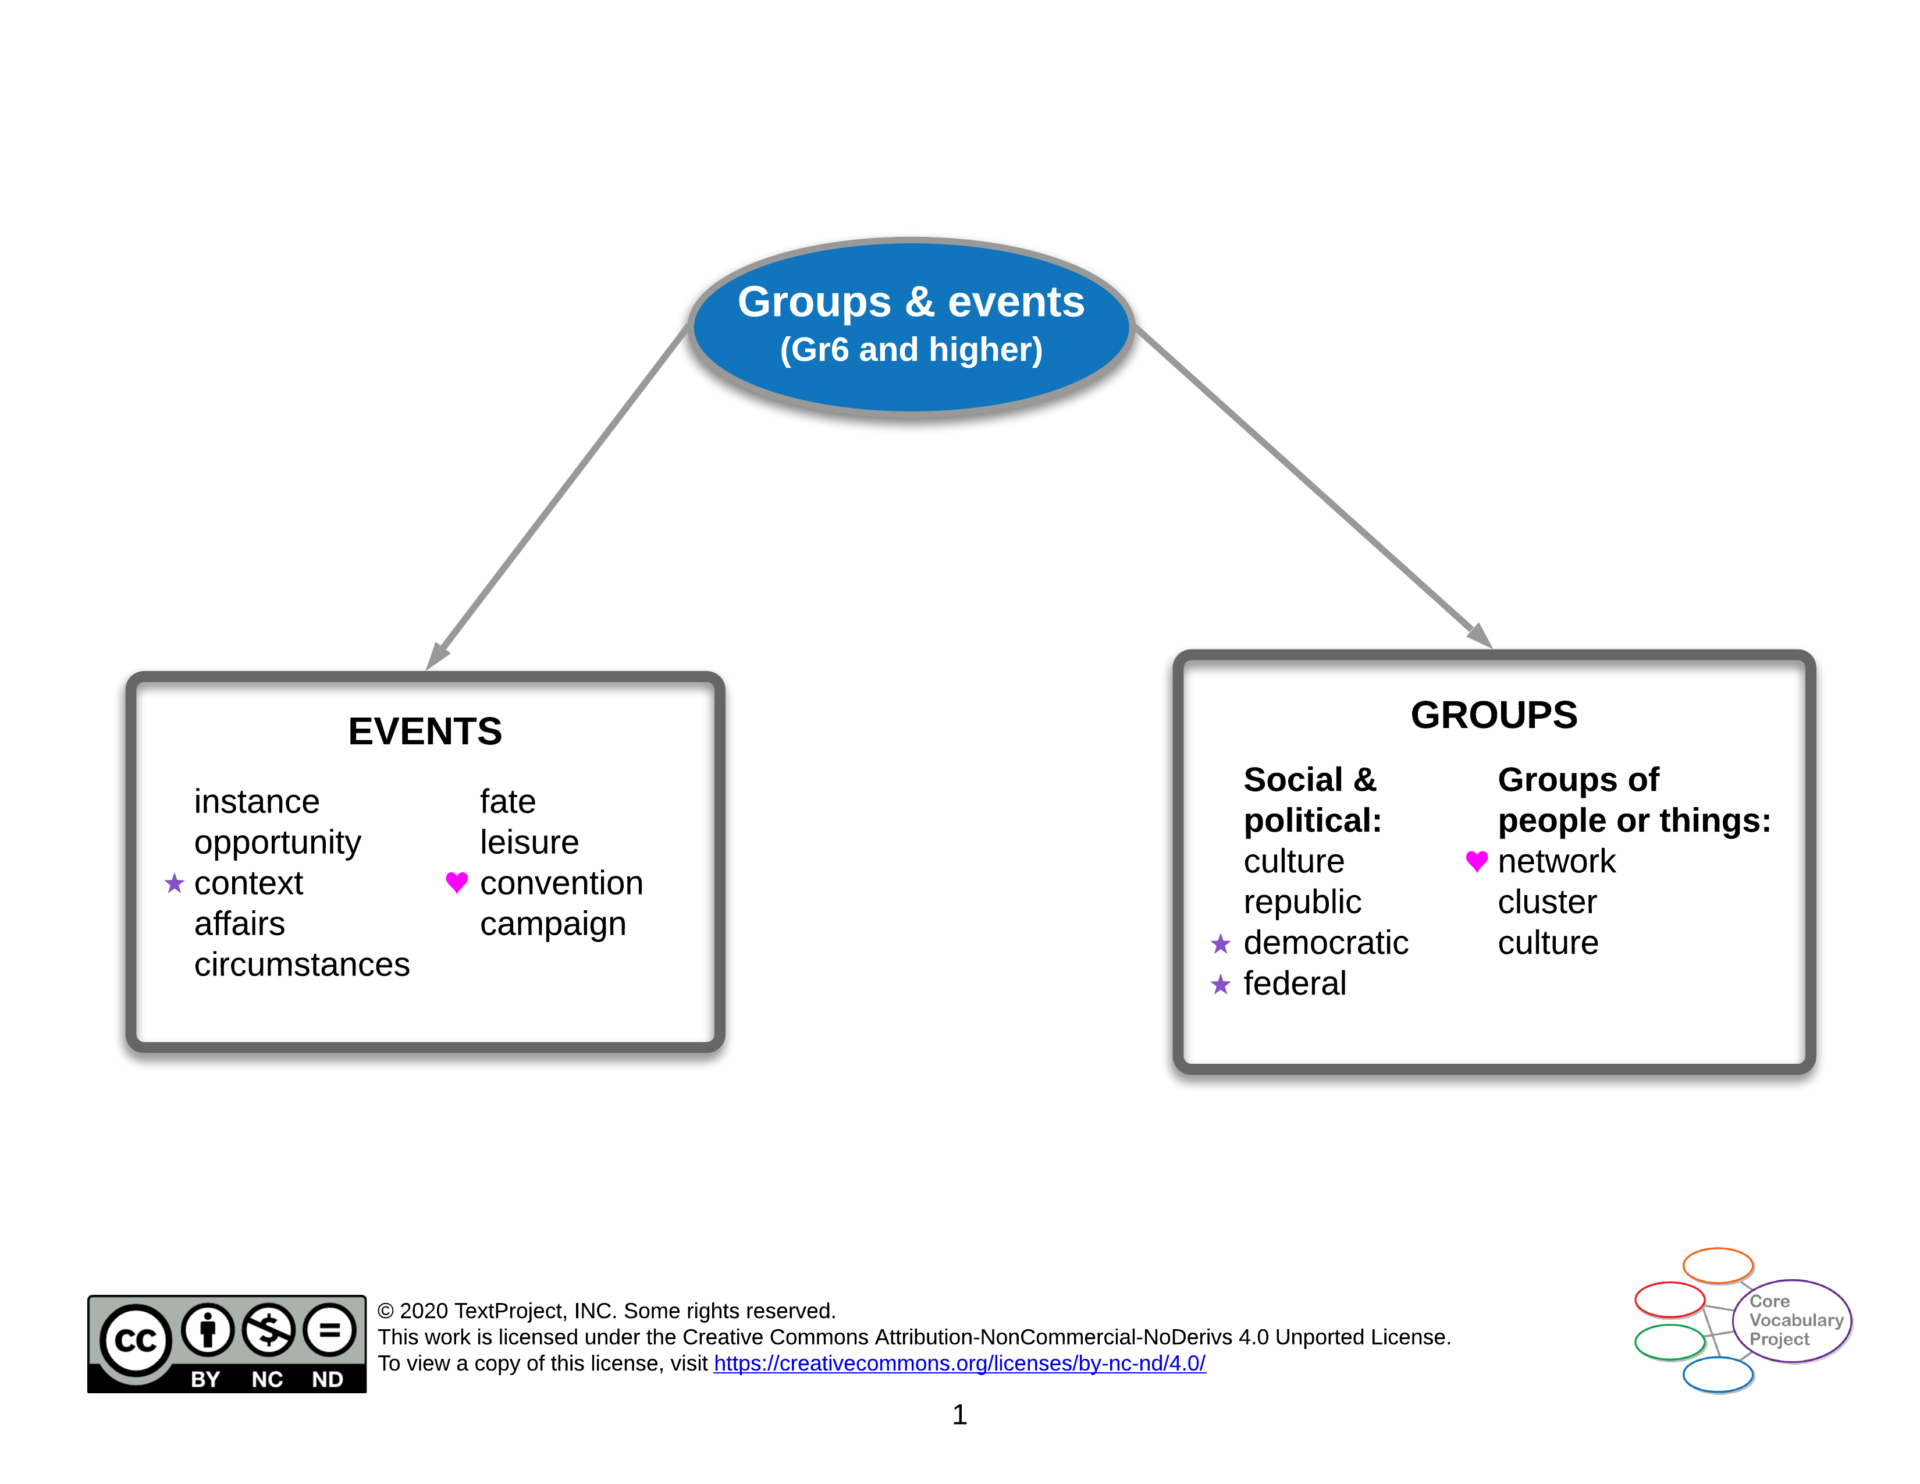 Groups-and-events-CVP-GR6-higher-Semantic-map.png